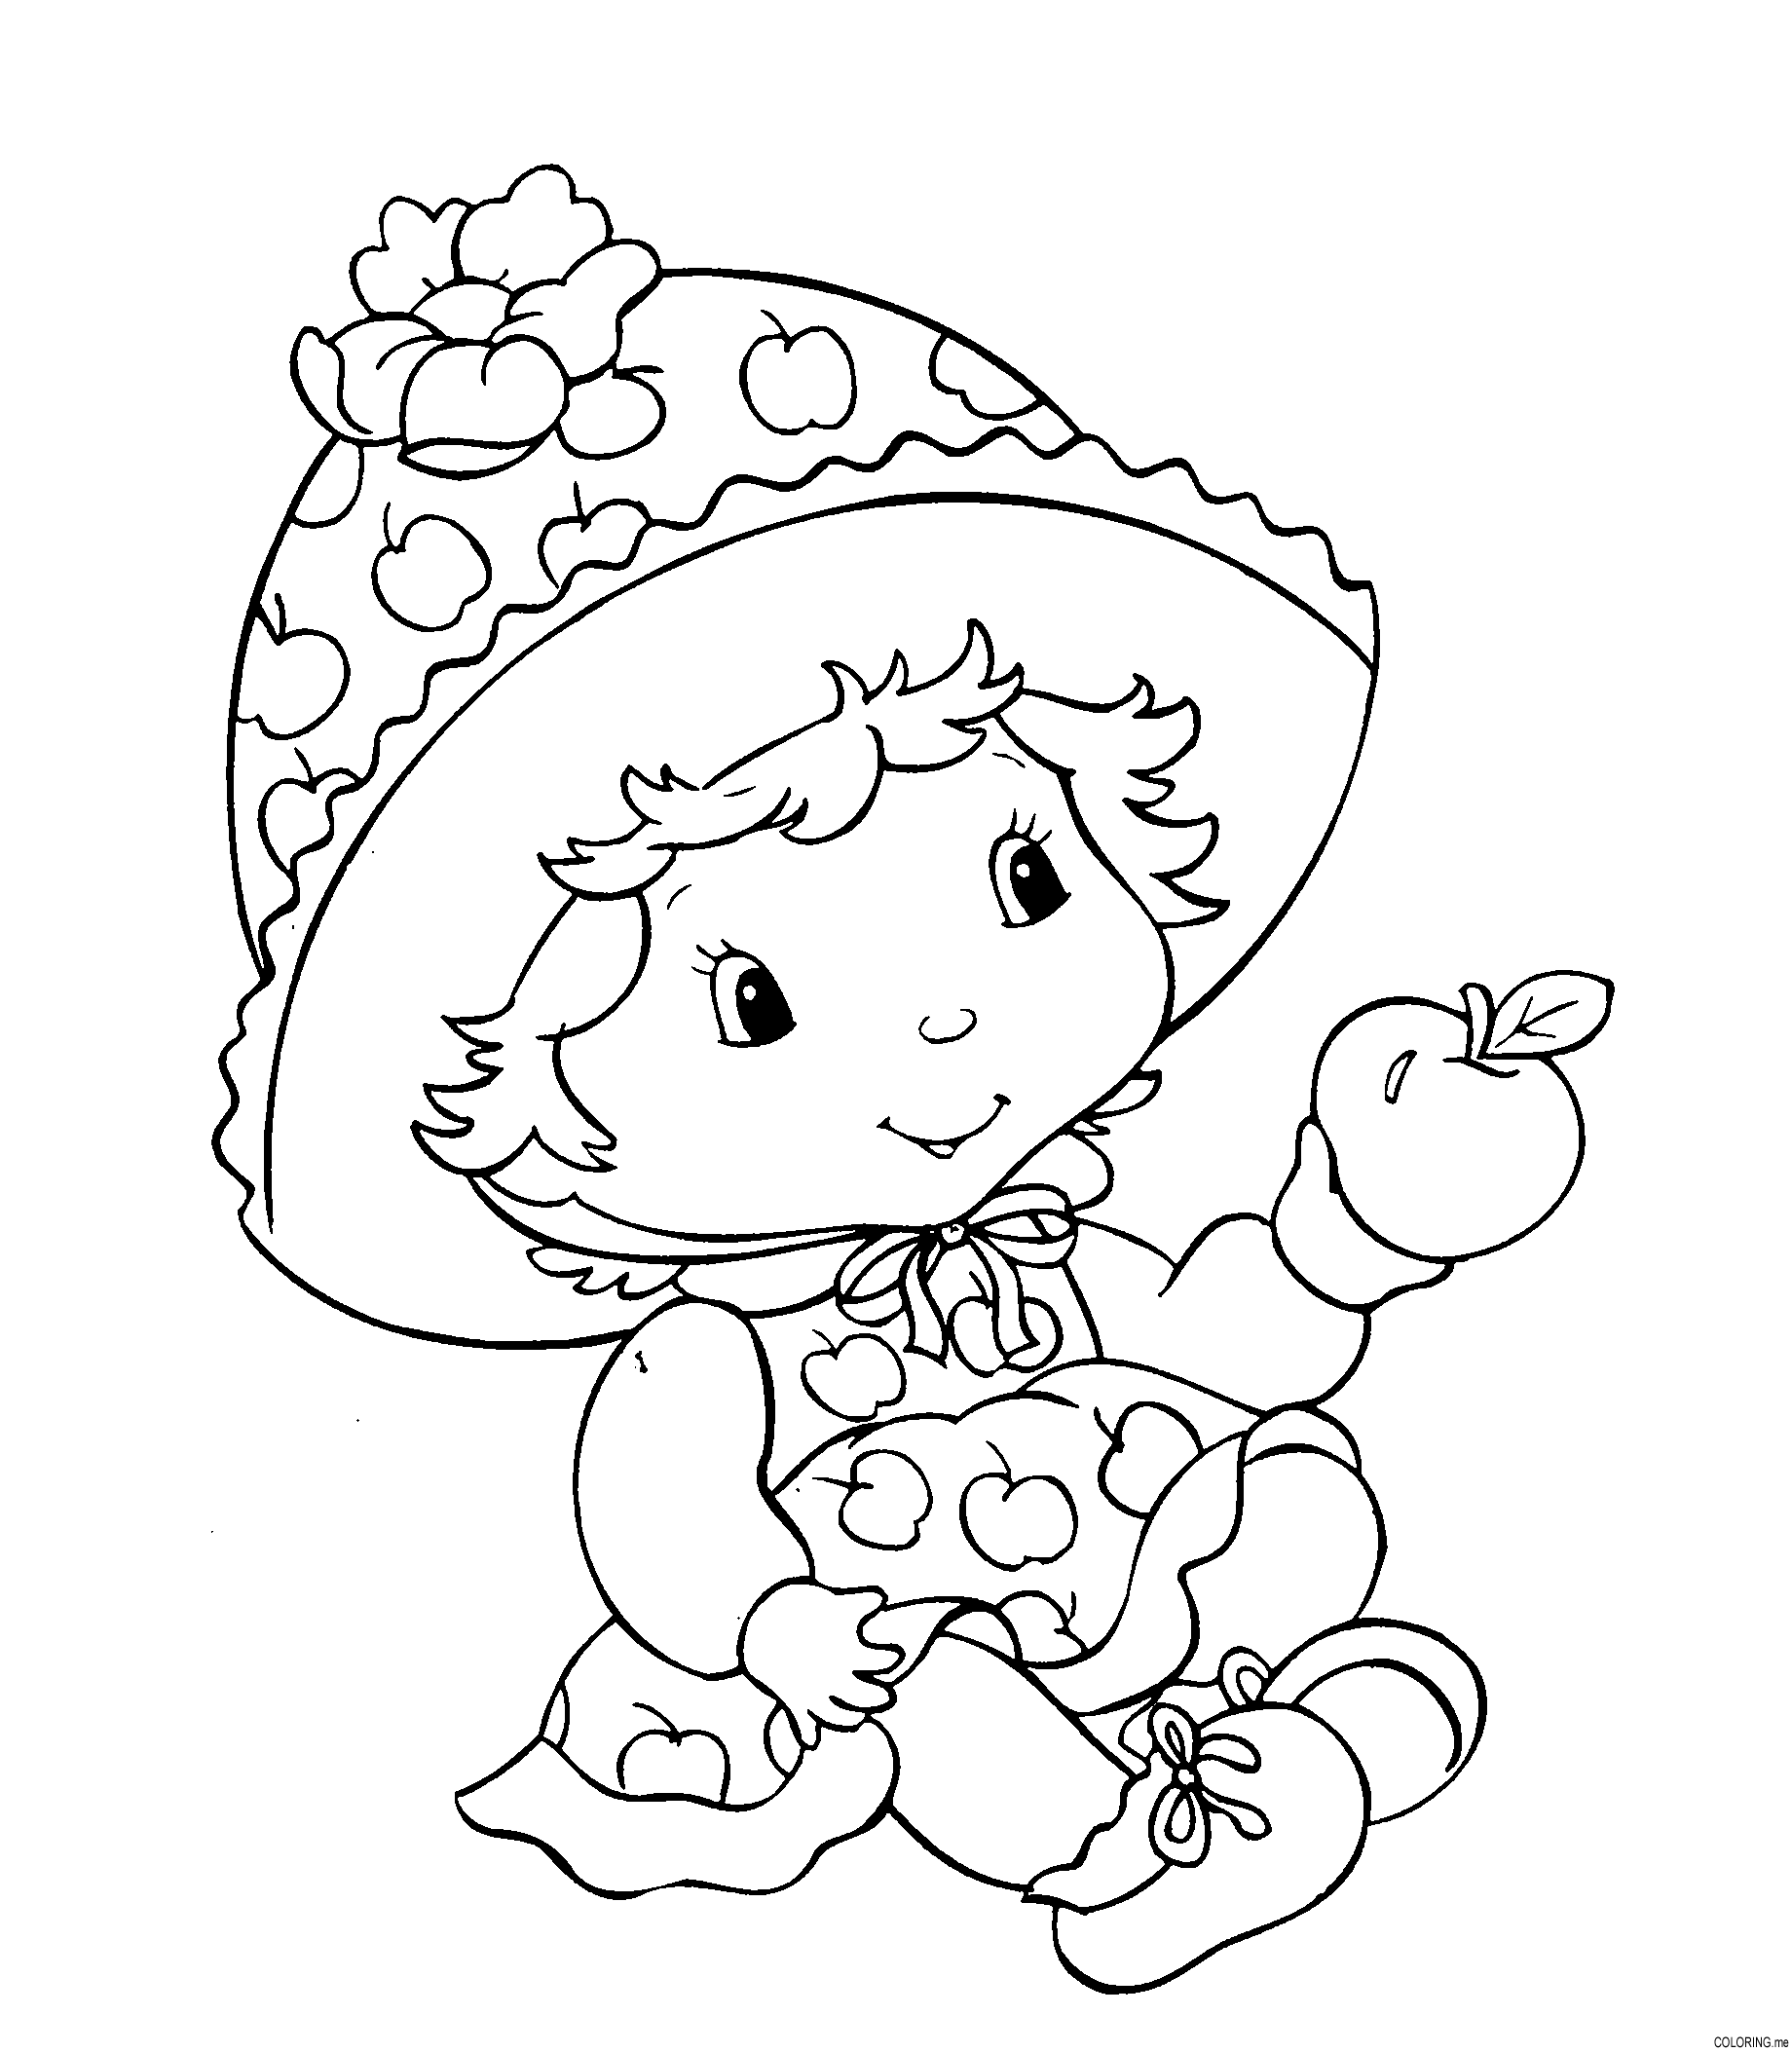 strawberry shortcake colouring pictures strawberry shortcake coloring pages getcoloringpagescom colouring pictures shortcake strawberry 